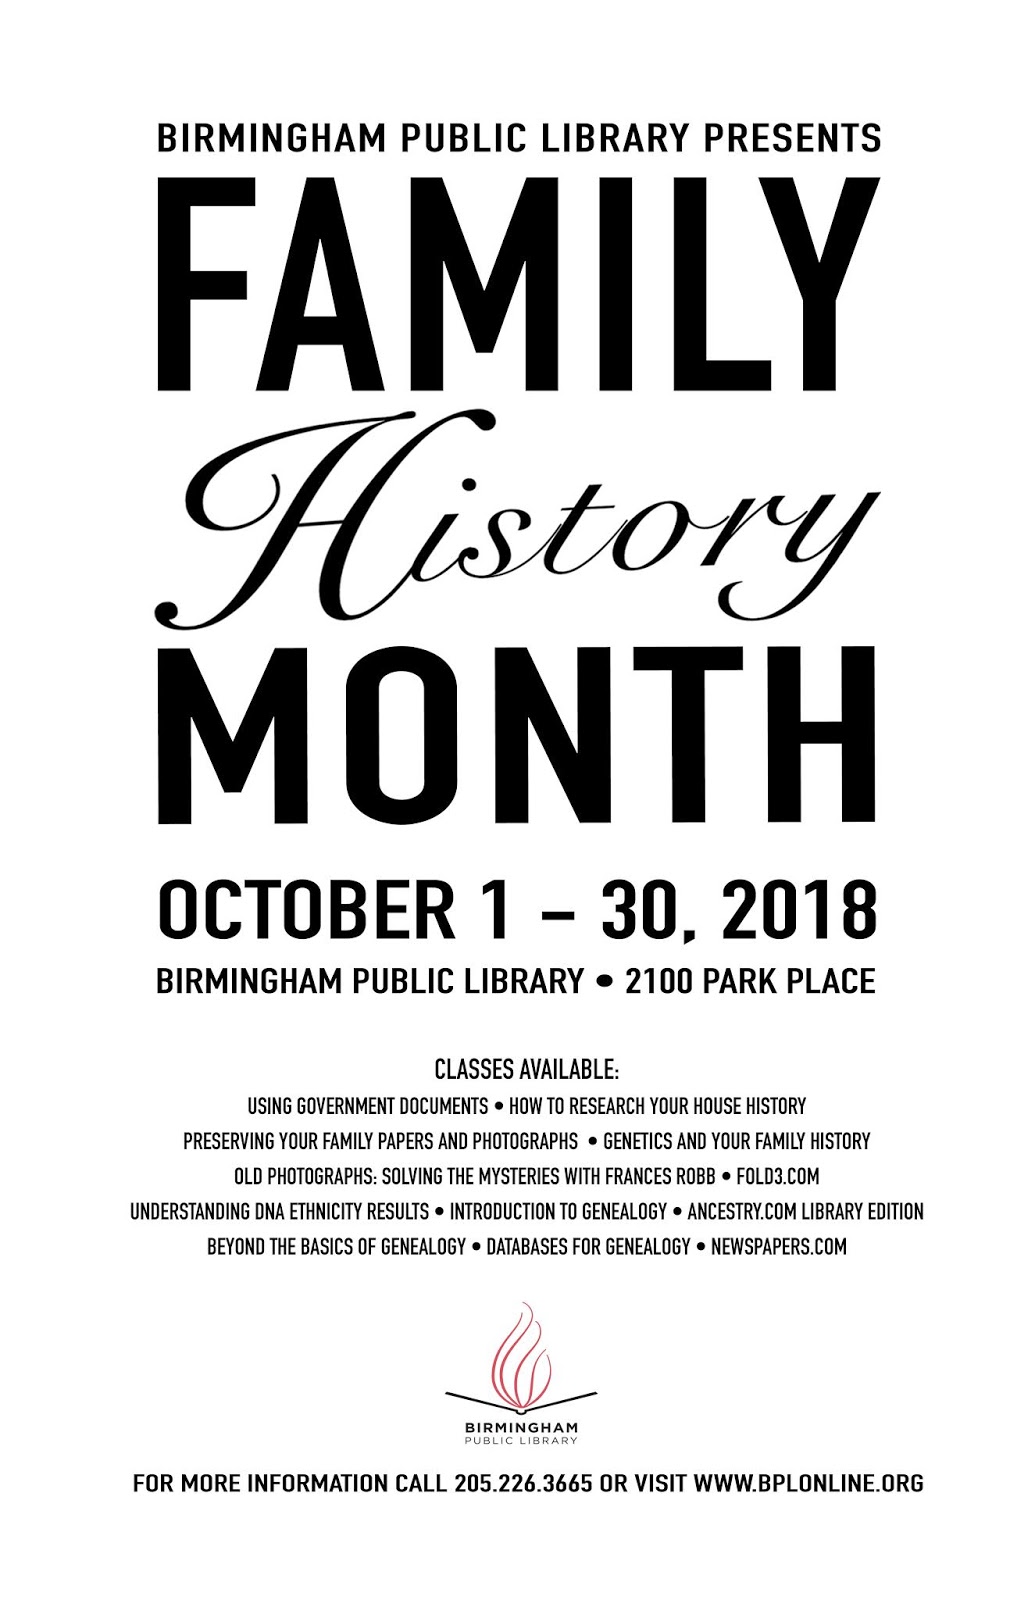 Birmingham Public Library Hosting Events To Celebrate Family History Month In October - birmingham public library roblox is it safe